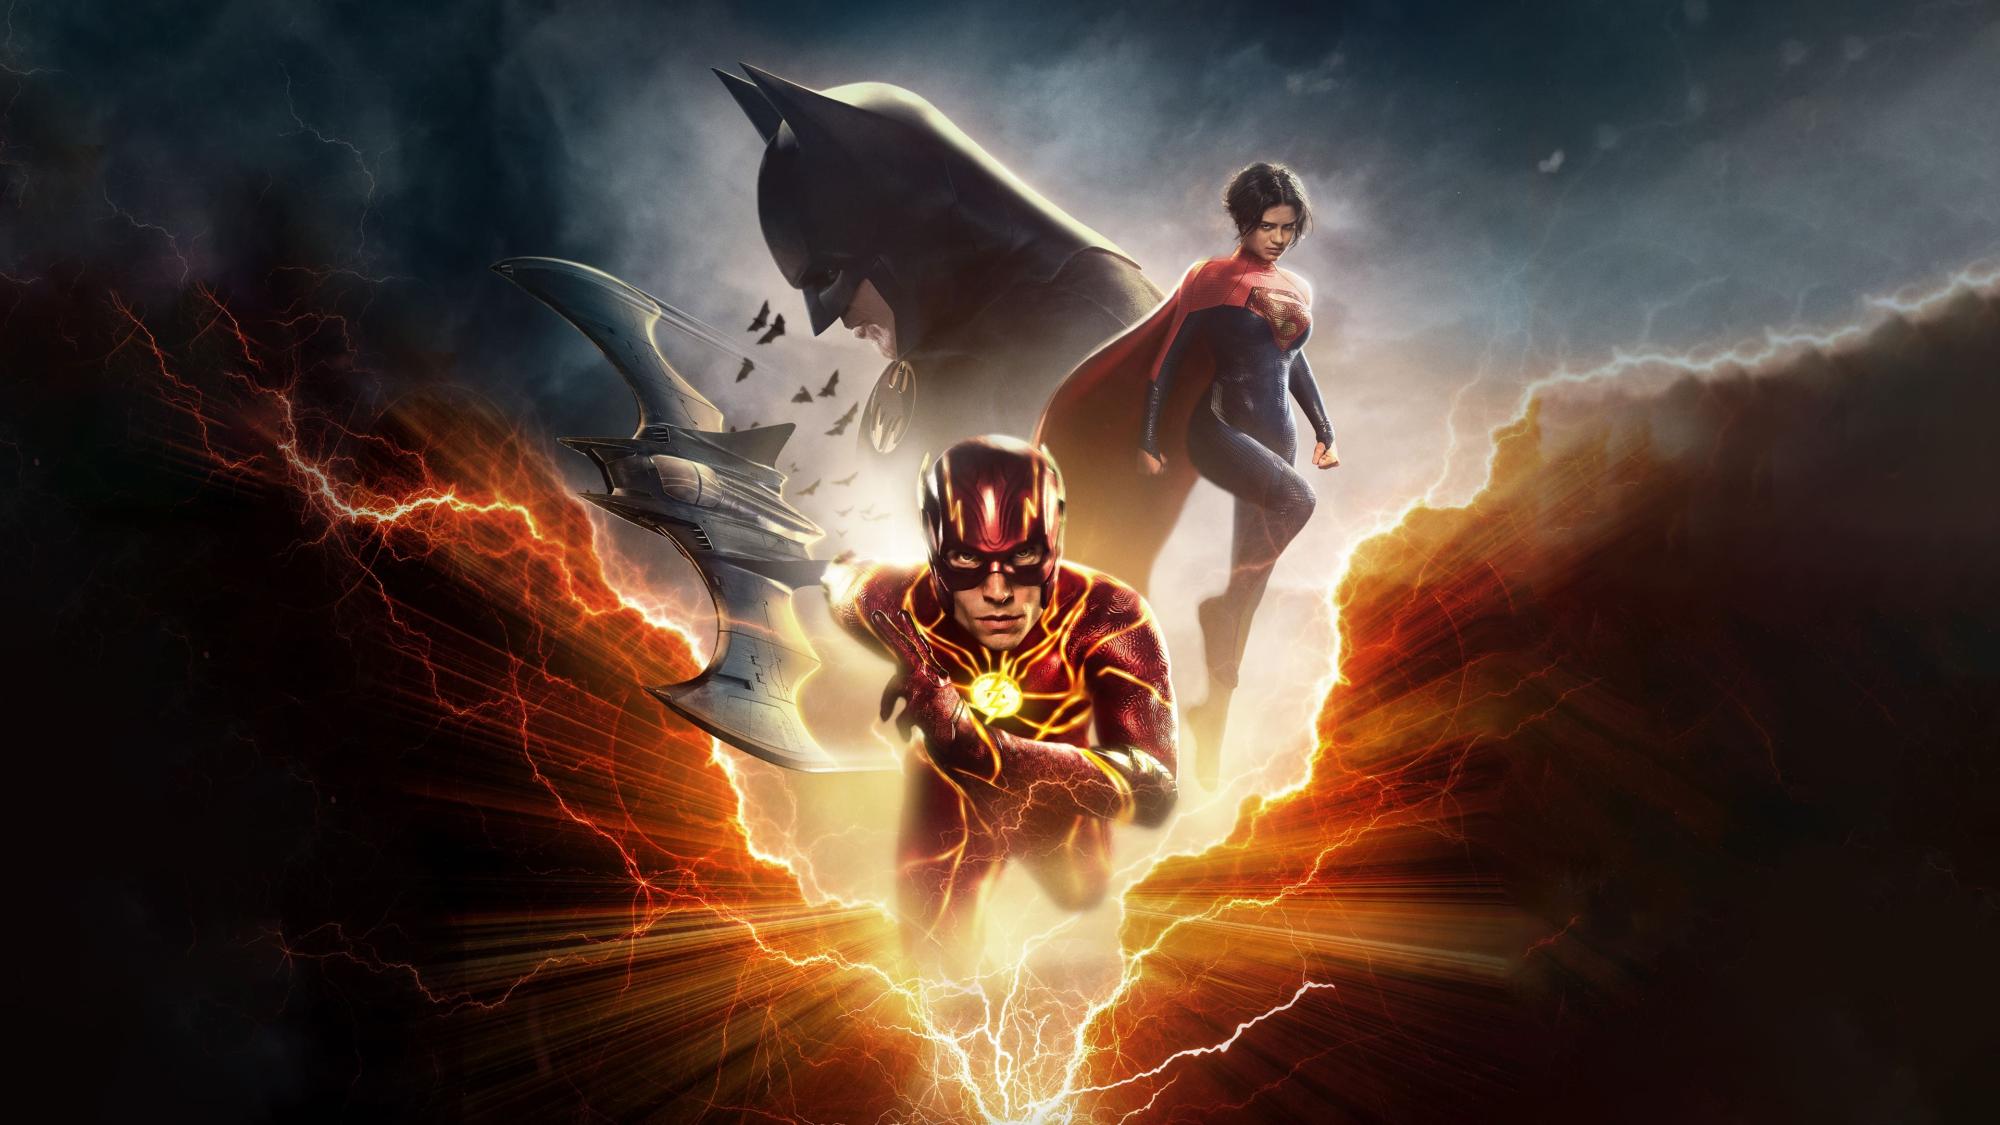 Backdrop Image for The Flash